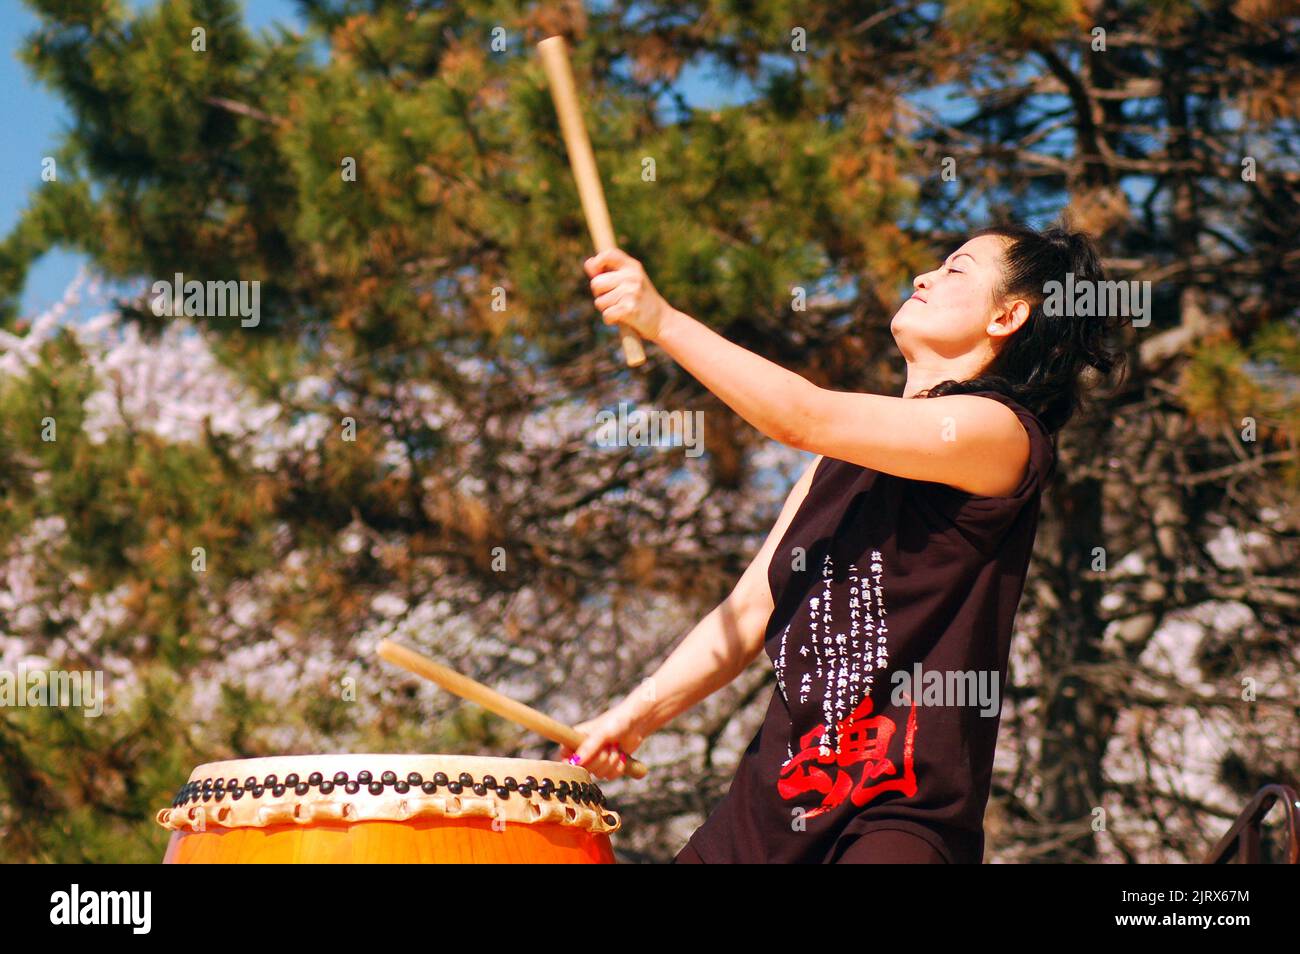 A Japanese Woman performs Traditional Taiko Drumming during a sakura cherry blossom festival in the spring Stock Photo